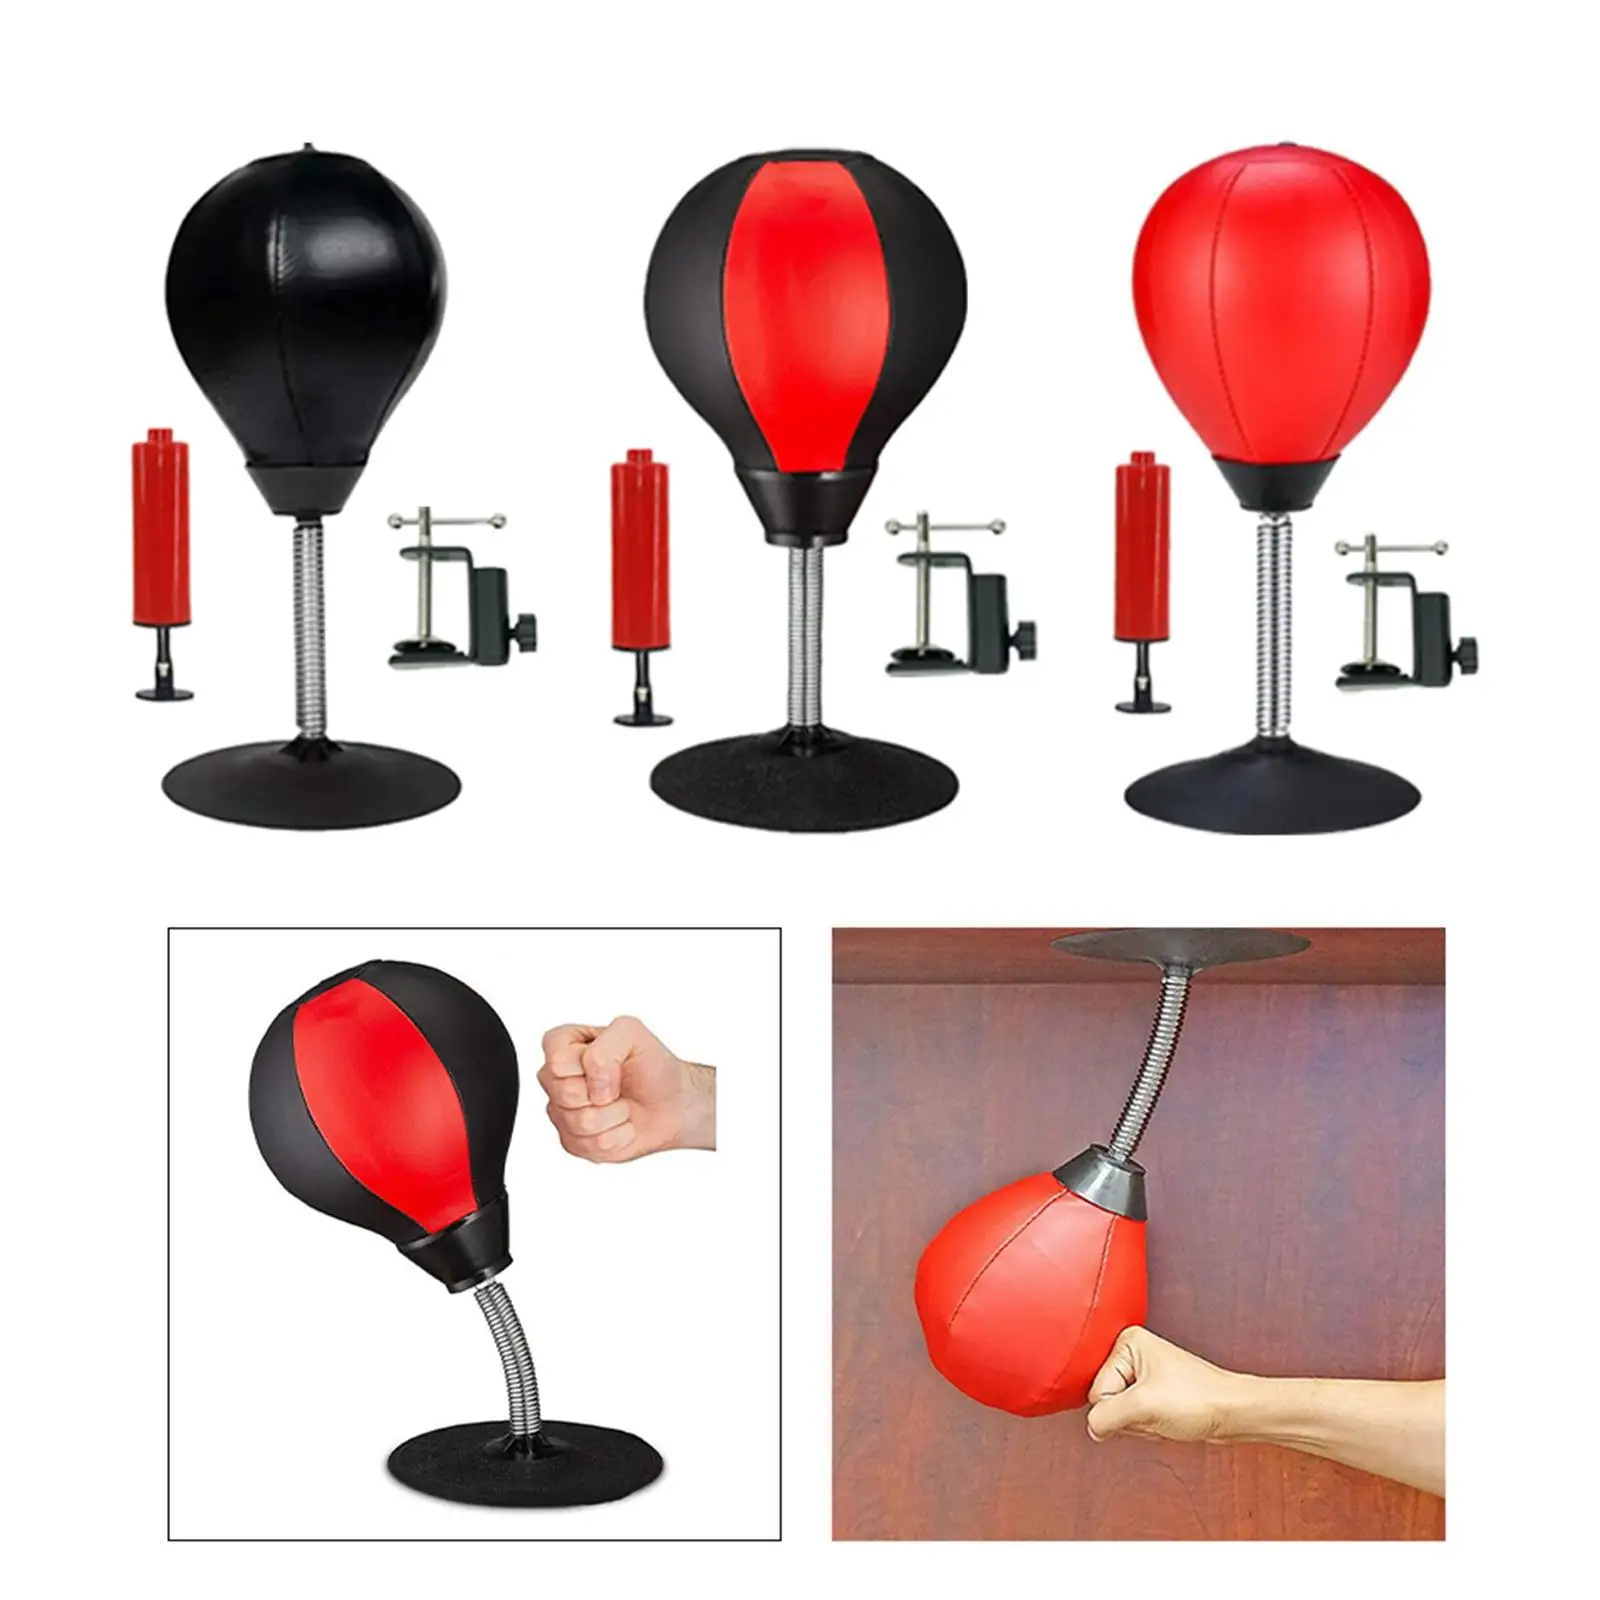 Desktop Punching Bag Decompression Toy Professional Speedballs Reaction Speed Balls Ball for Sports Training Boxing Fighting Gym